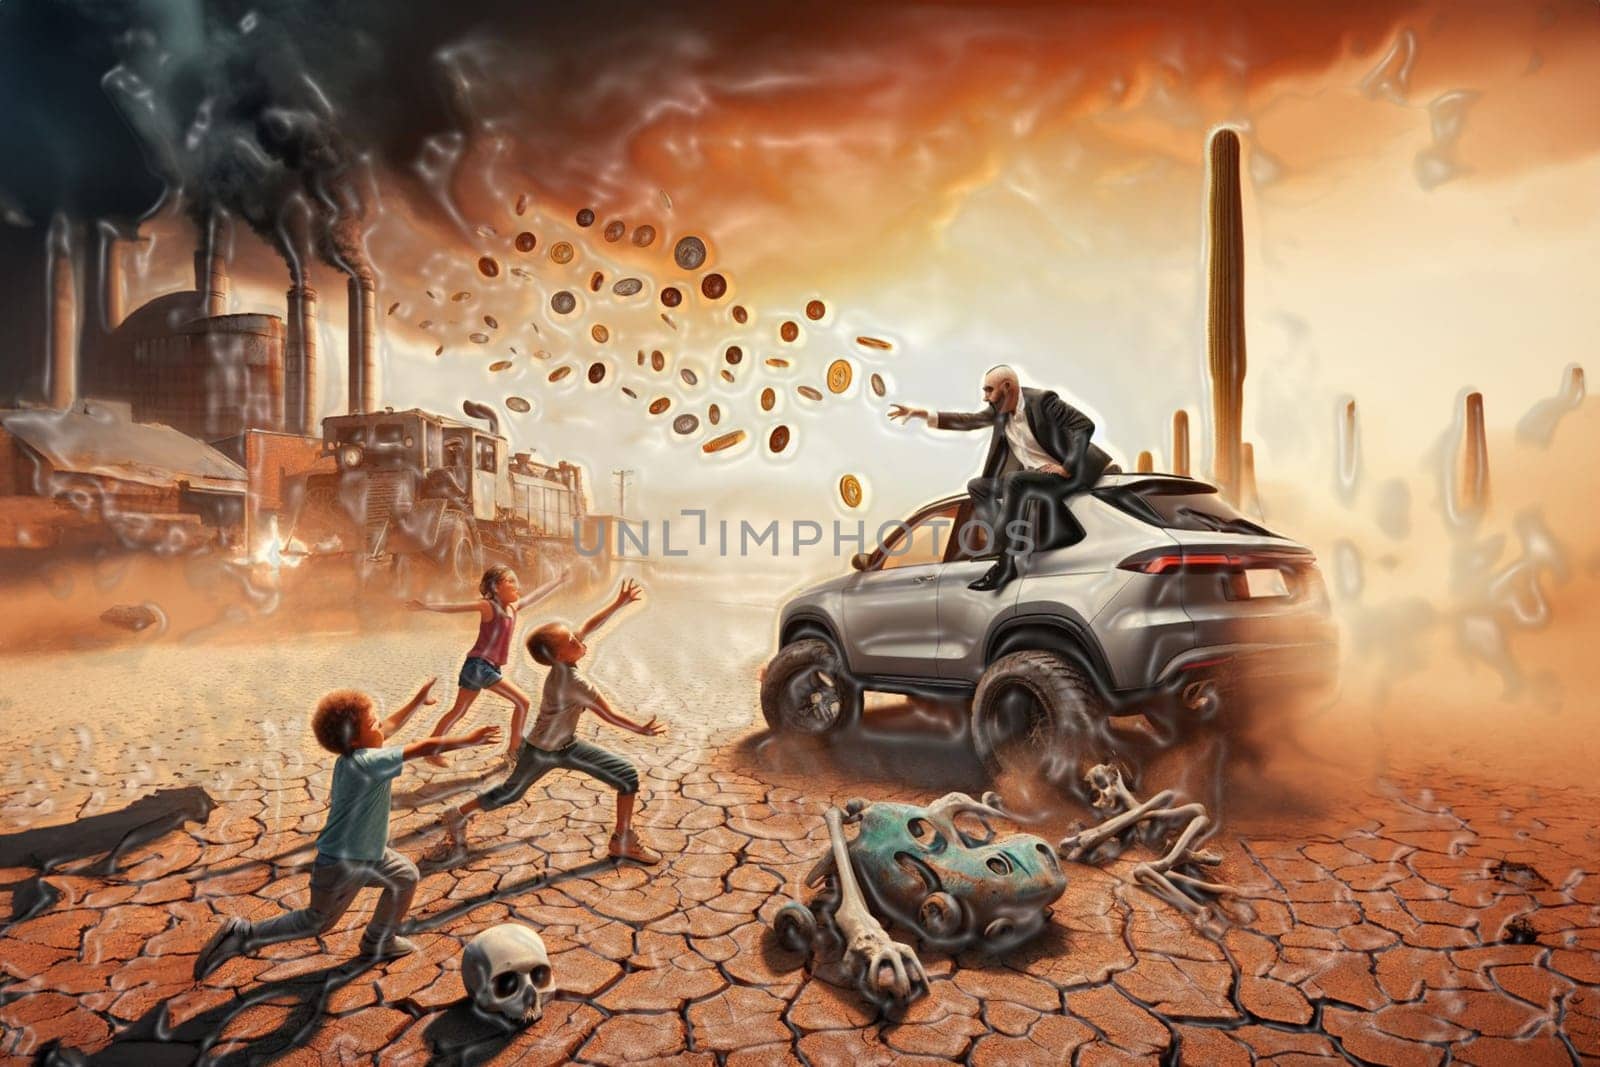 Children playing ball in dystopian scene, Scorched earth arid soil desert heat sun climate change global warming drought, abandoned unfertile land,apocalyptic scene, ai generated